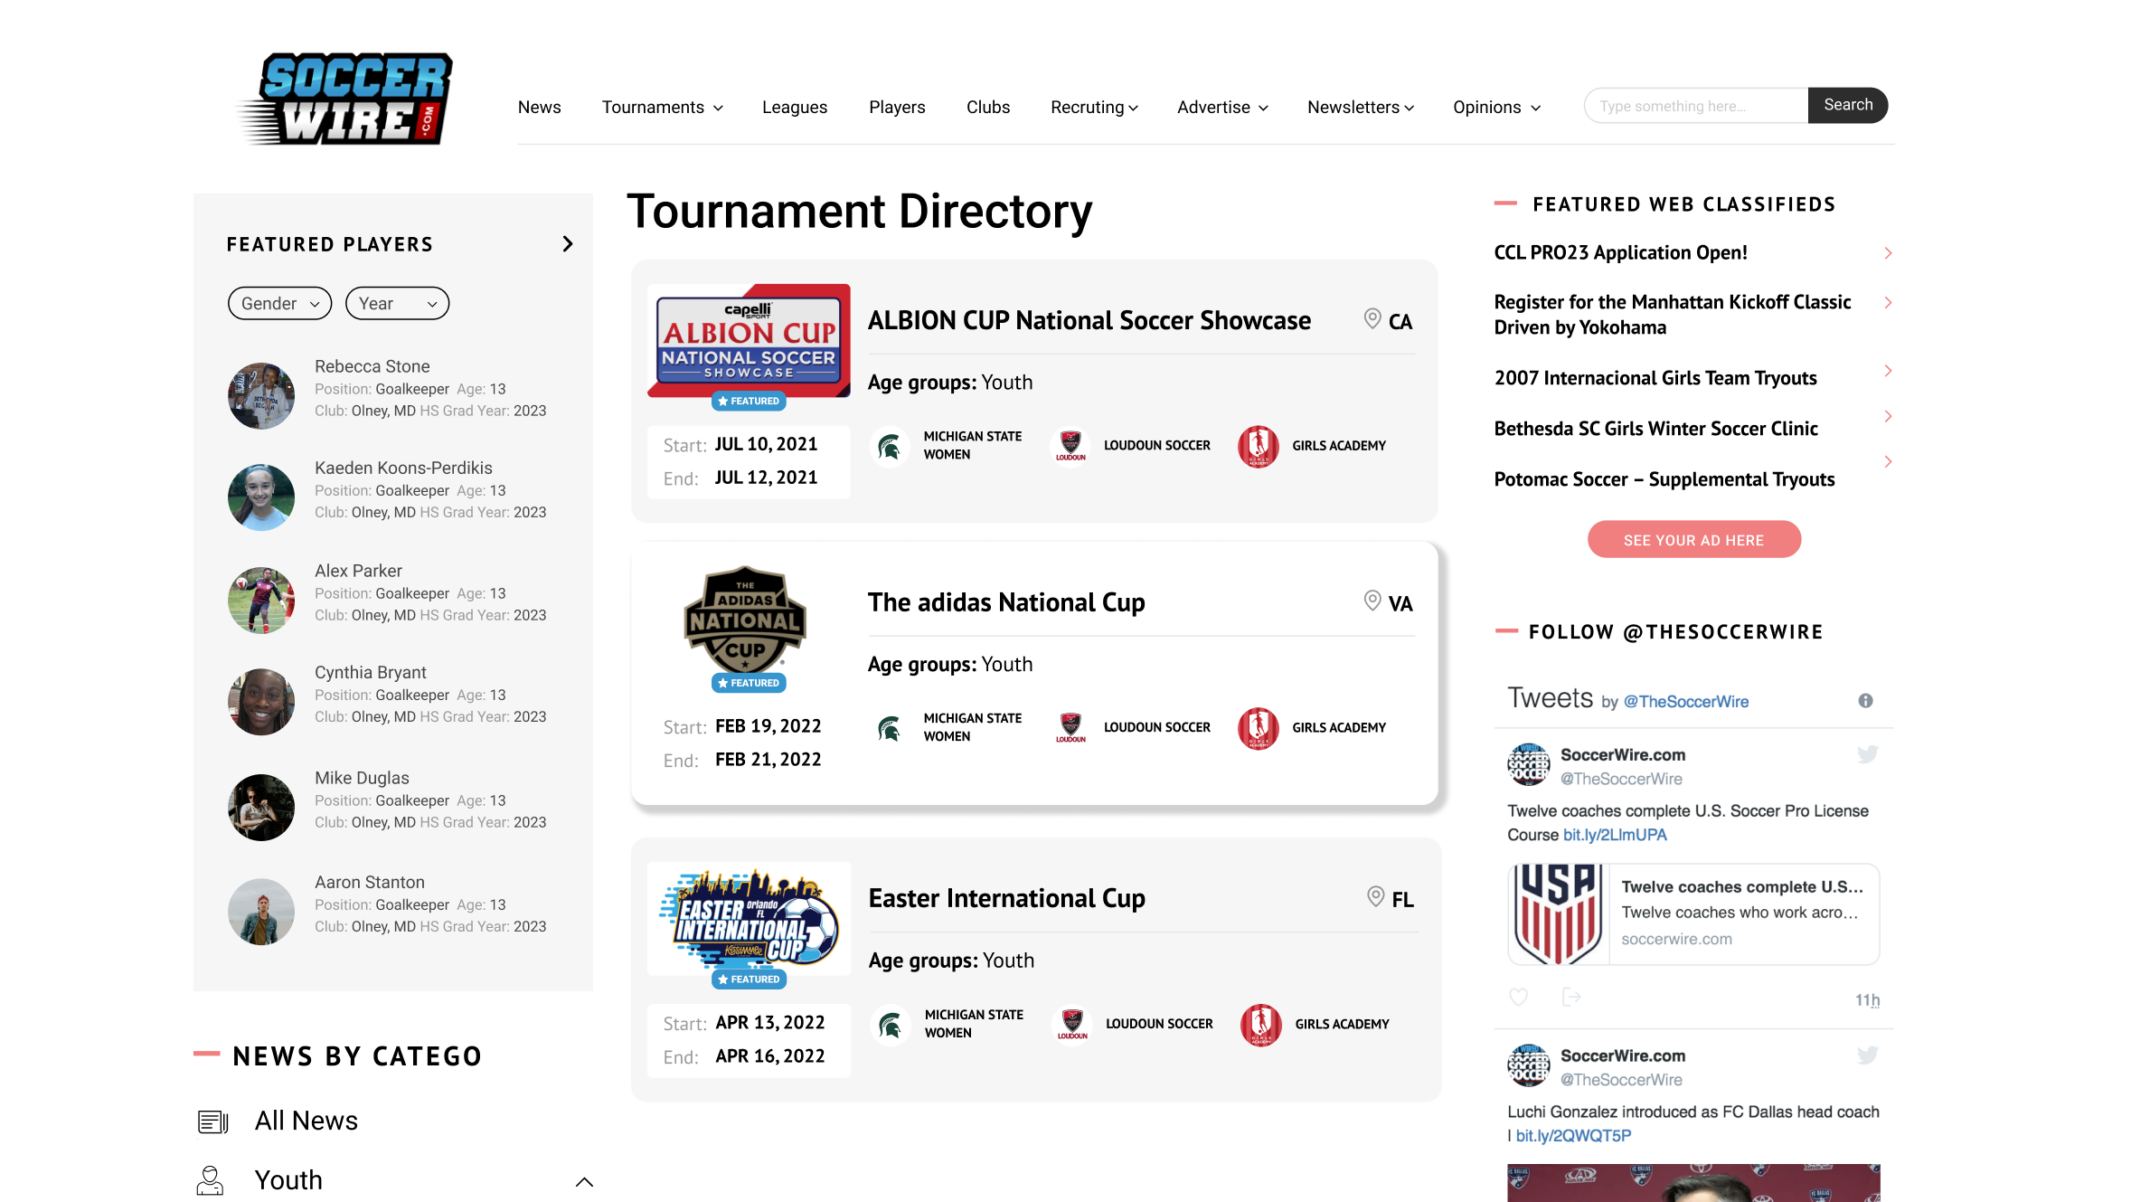 Website design for sports media portal with scores, events, player directory and news